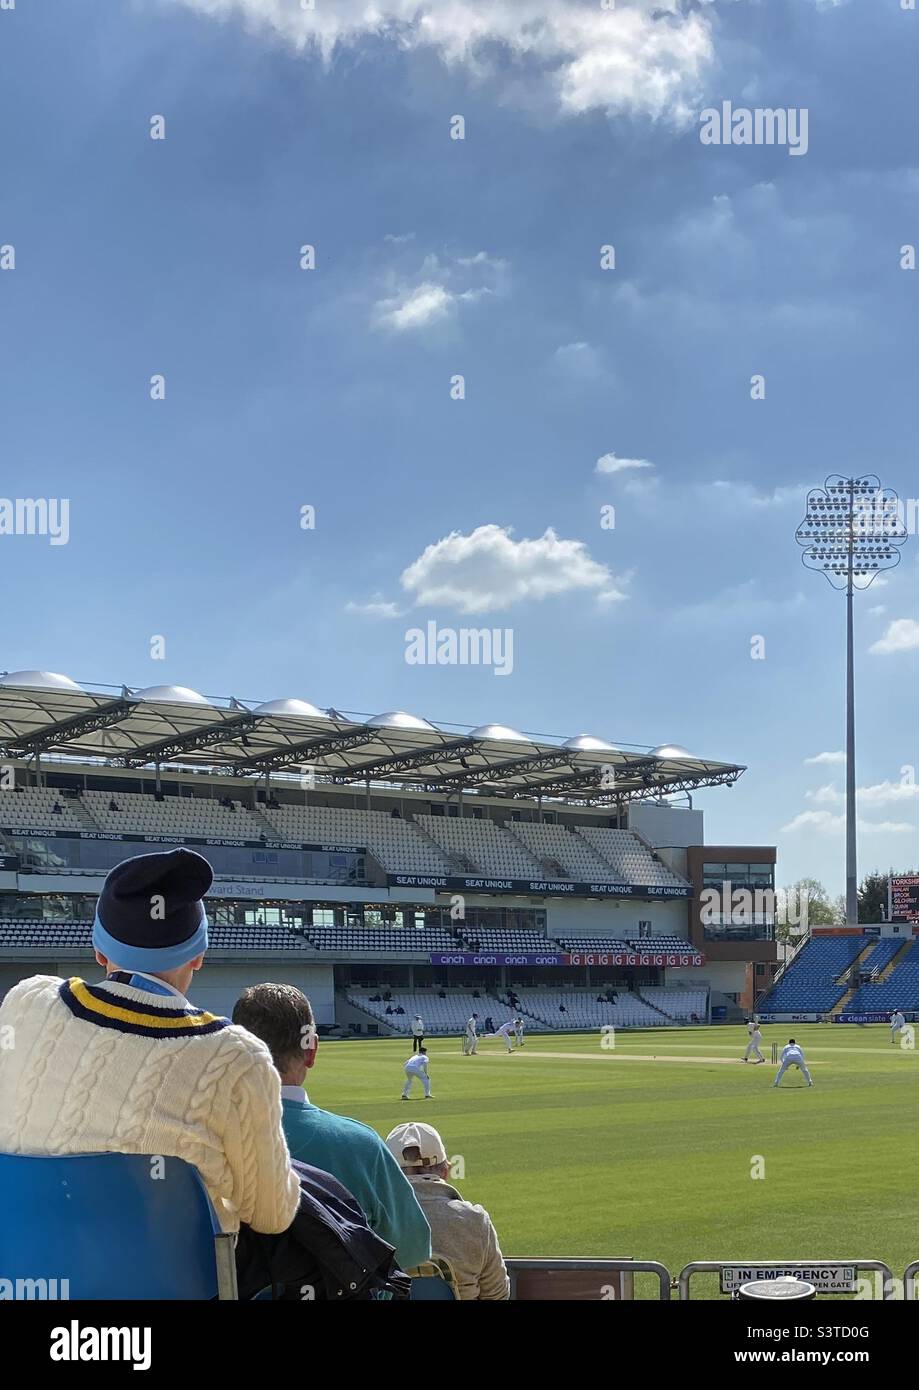 Red ball (traditional) cricket against Kent at Headingley Cricket Ground, Leeds, UK, home of Yorkshire County Cricket Club, on 29th April, 2022. This shows the new Howard Stand. Stock Photo